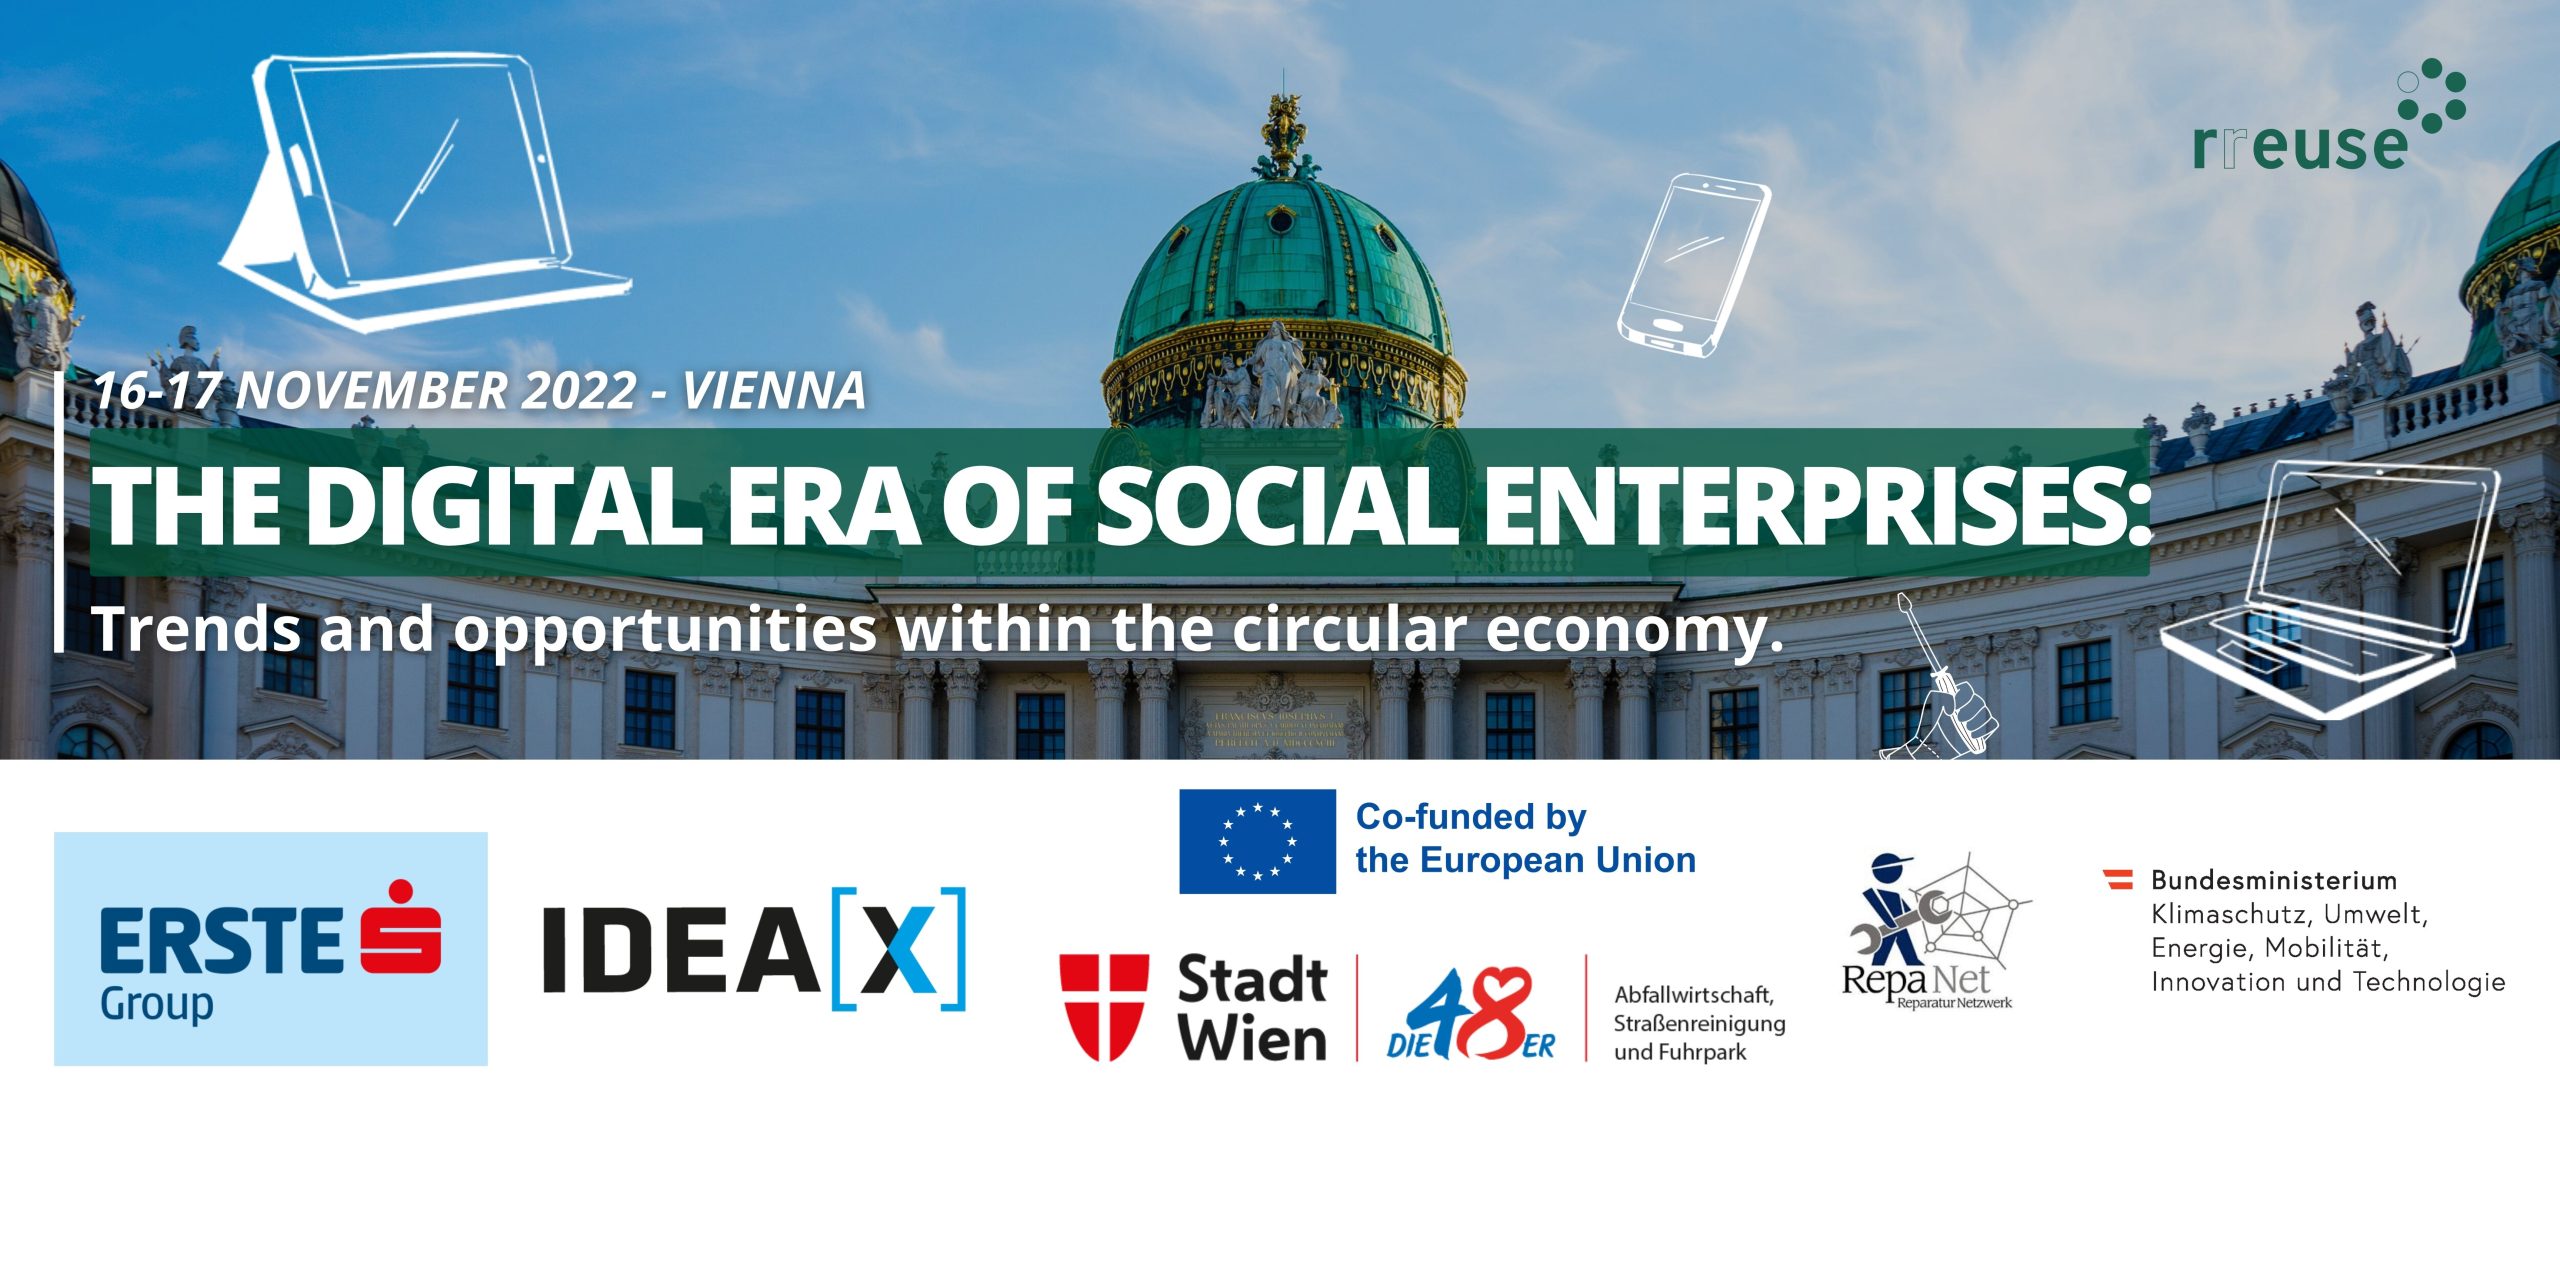 RREUSE 4th Annual Conference “The digital era of social enterprises: Trends and opportunities within the circular economy”